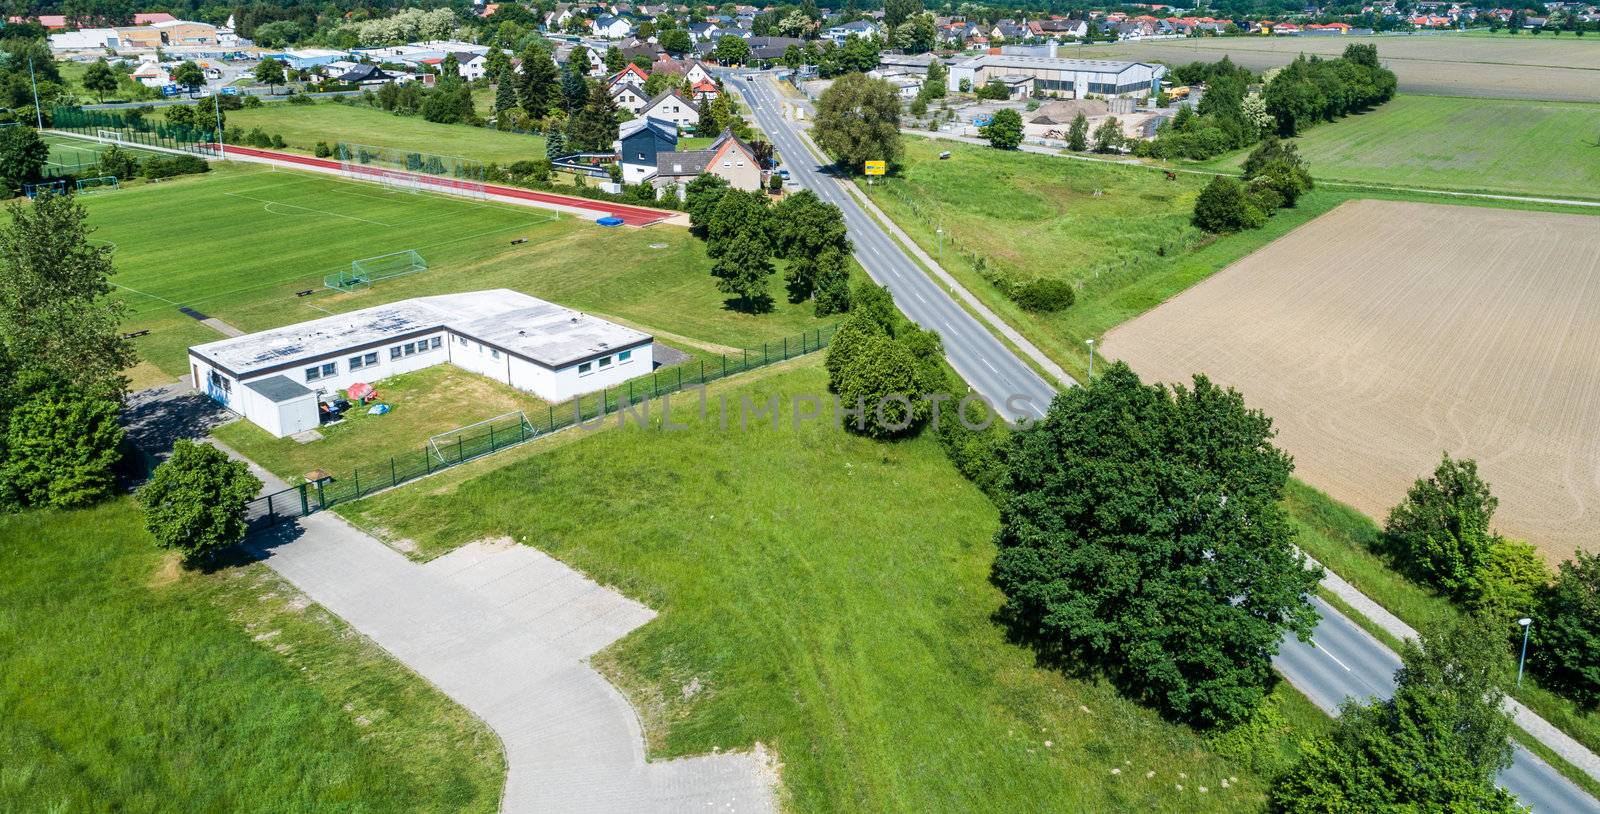 Aerial view of the clubhouse of a regional football club on the outskirts of the city next to a big street, football field in the background by geogif